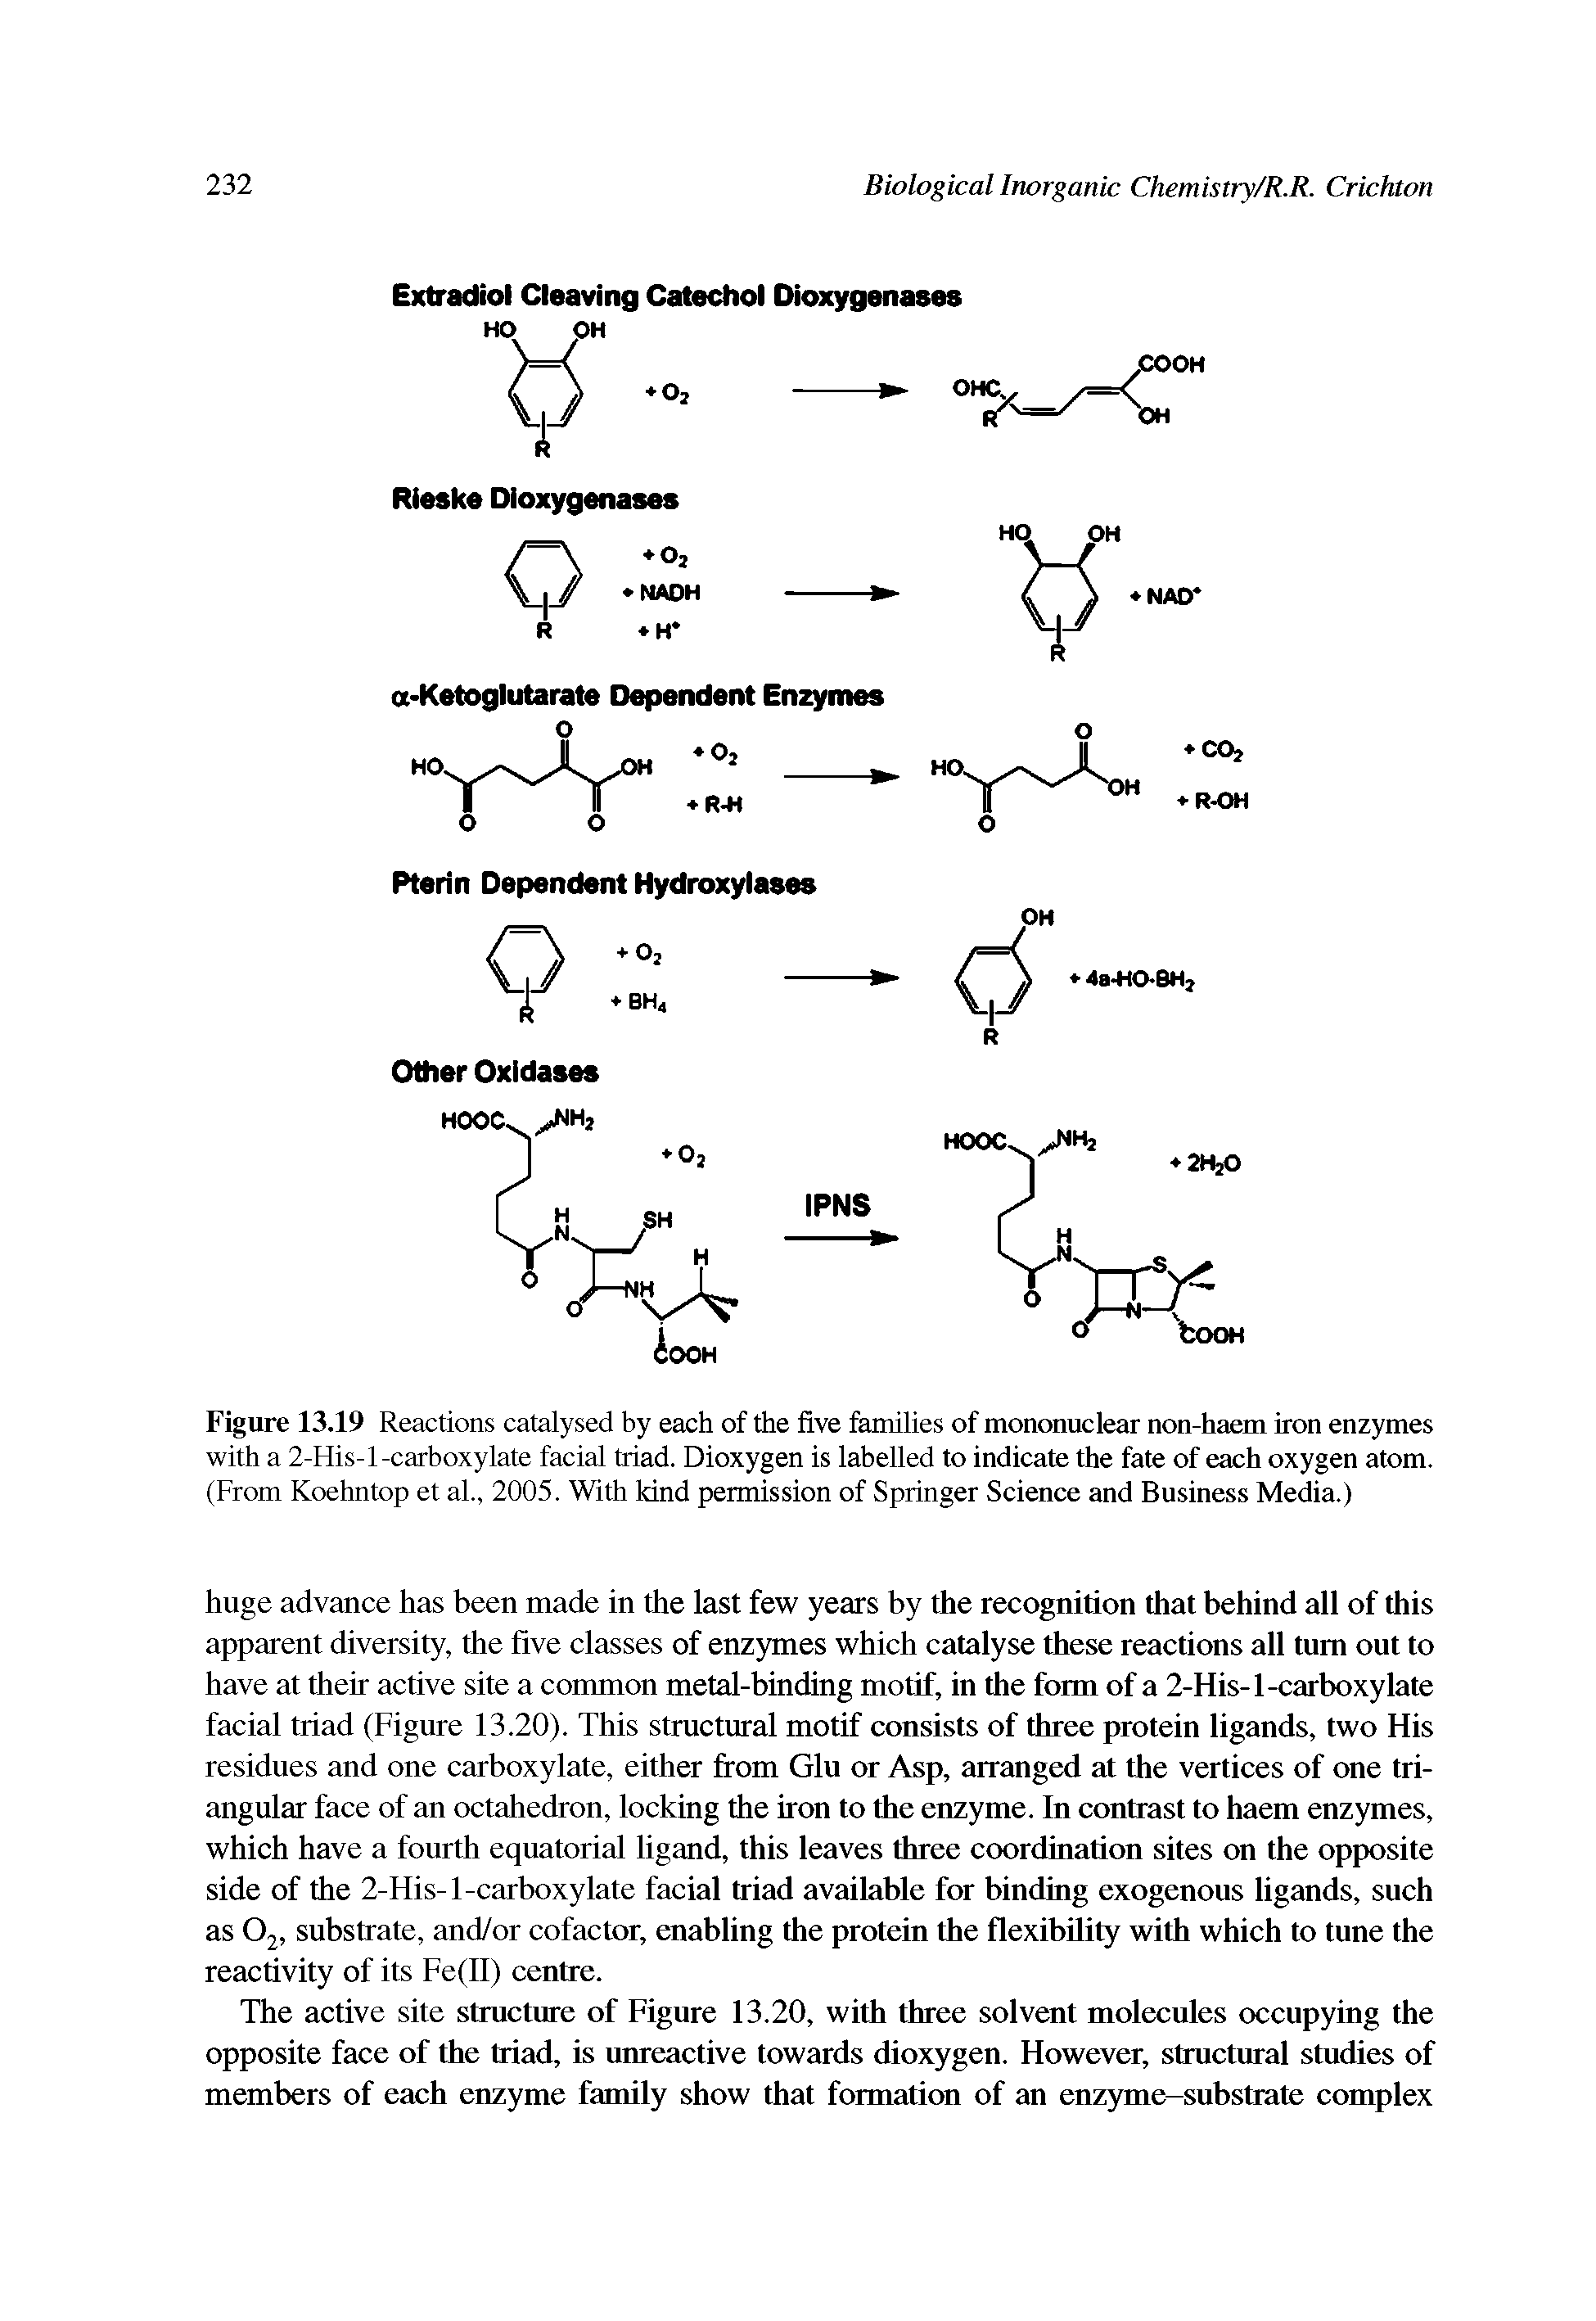 Figure 13.19 Reactions catalysed by each of the five families of mononuclear non-haem iron enzymes with a 2-His-l-carboxylate facial triad. Dioxygen is labelled to indicate the fate of each oxygen atom. (From Koehntop et al., 2005. With kind permission of Springer Science and Business Media.)...